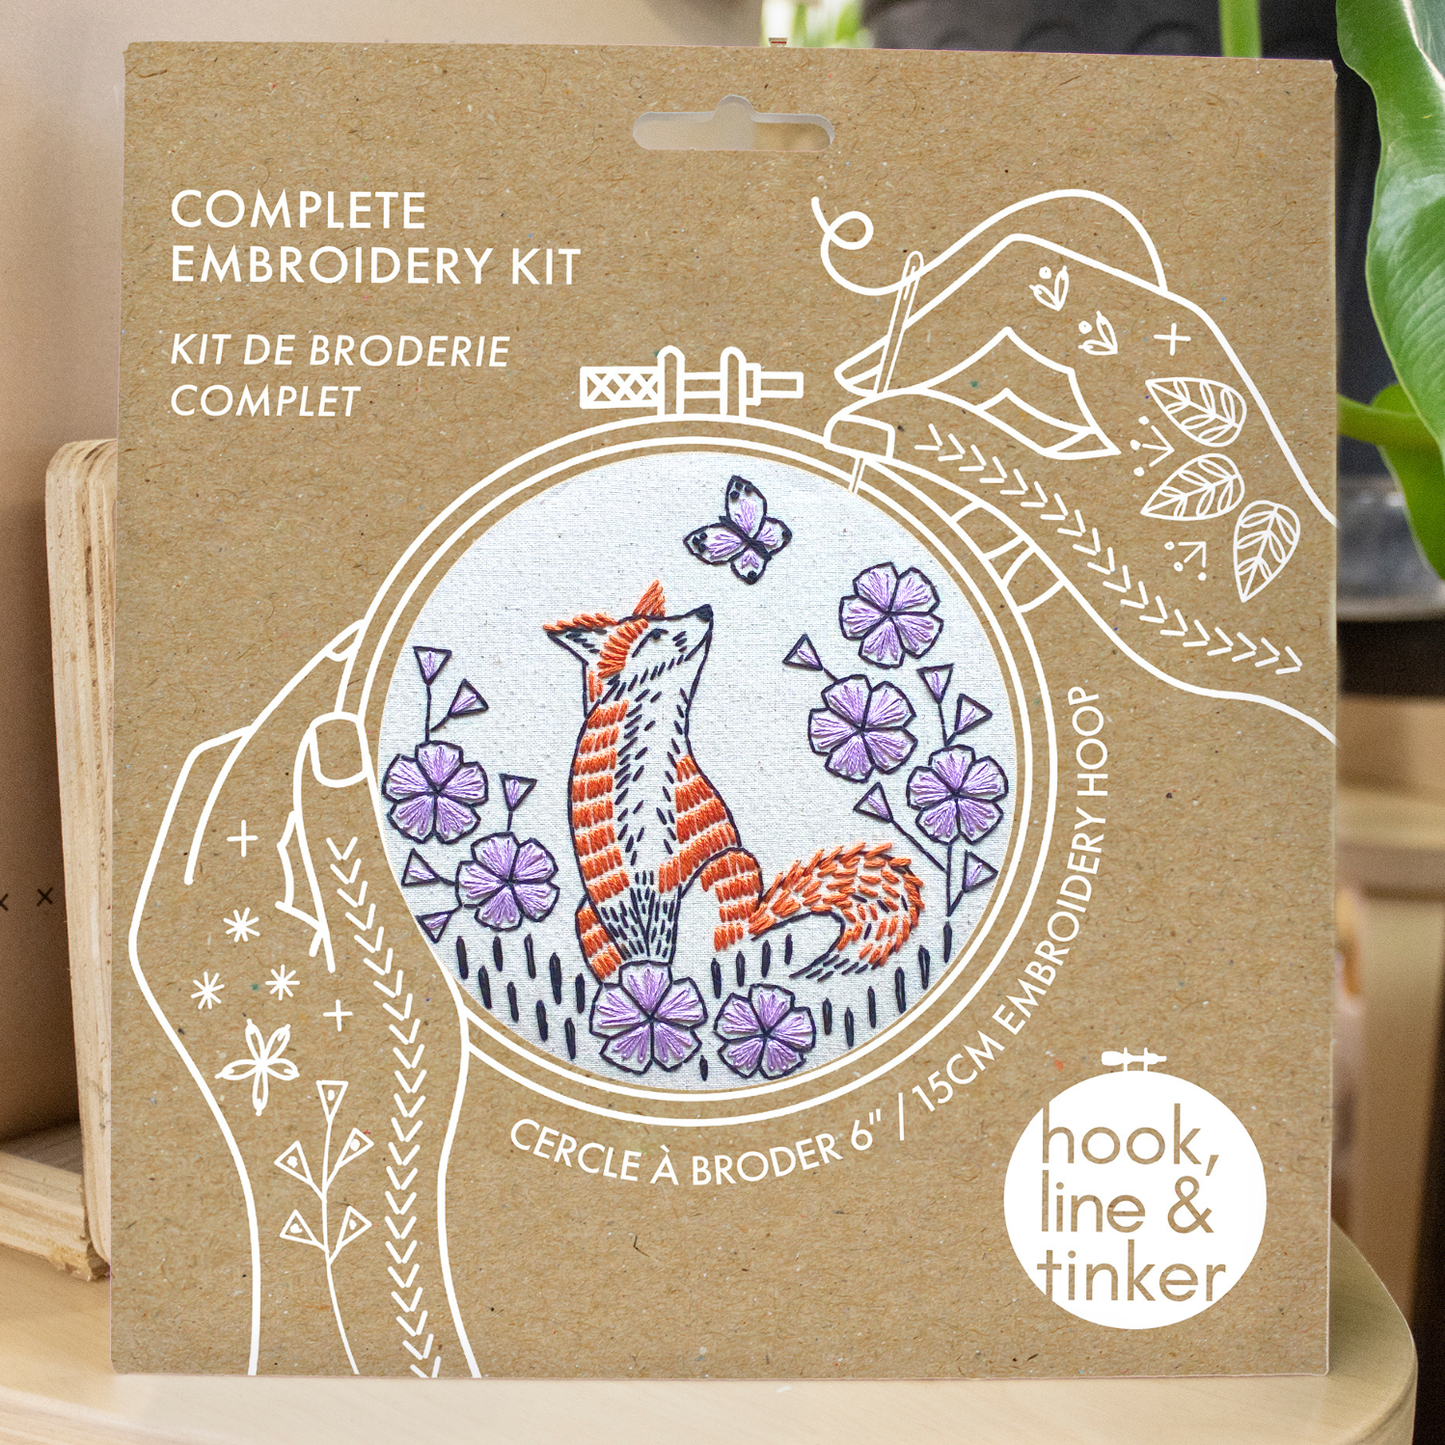 NEW! Fox in Phlox Complete Embroidery Kit